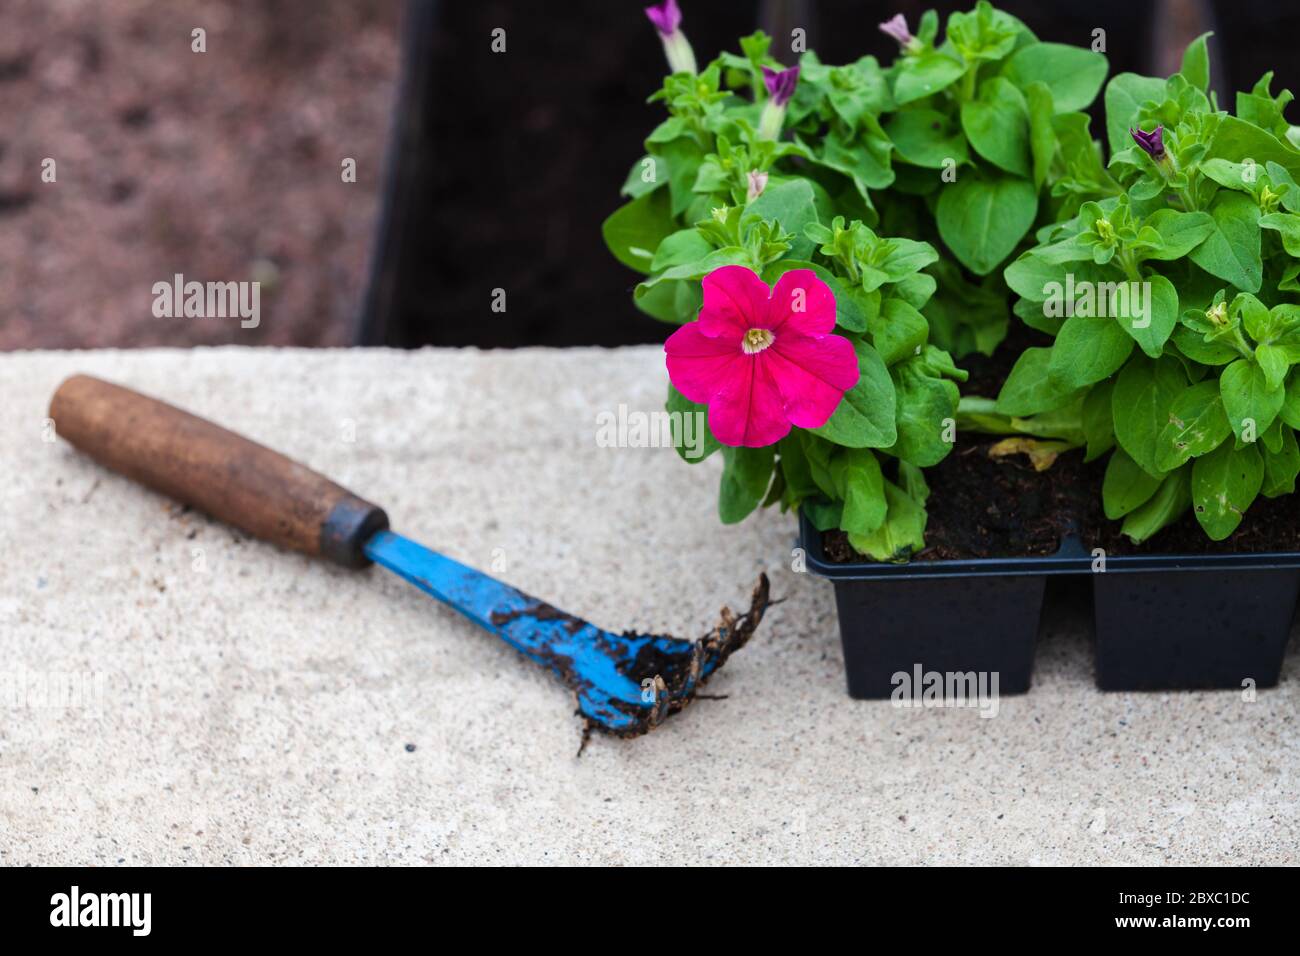 Blue hoe lays near petunia seedlings in decorative pots, close-up photo with selective focus Stock Photo